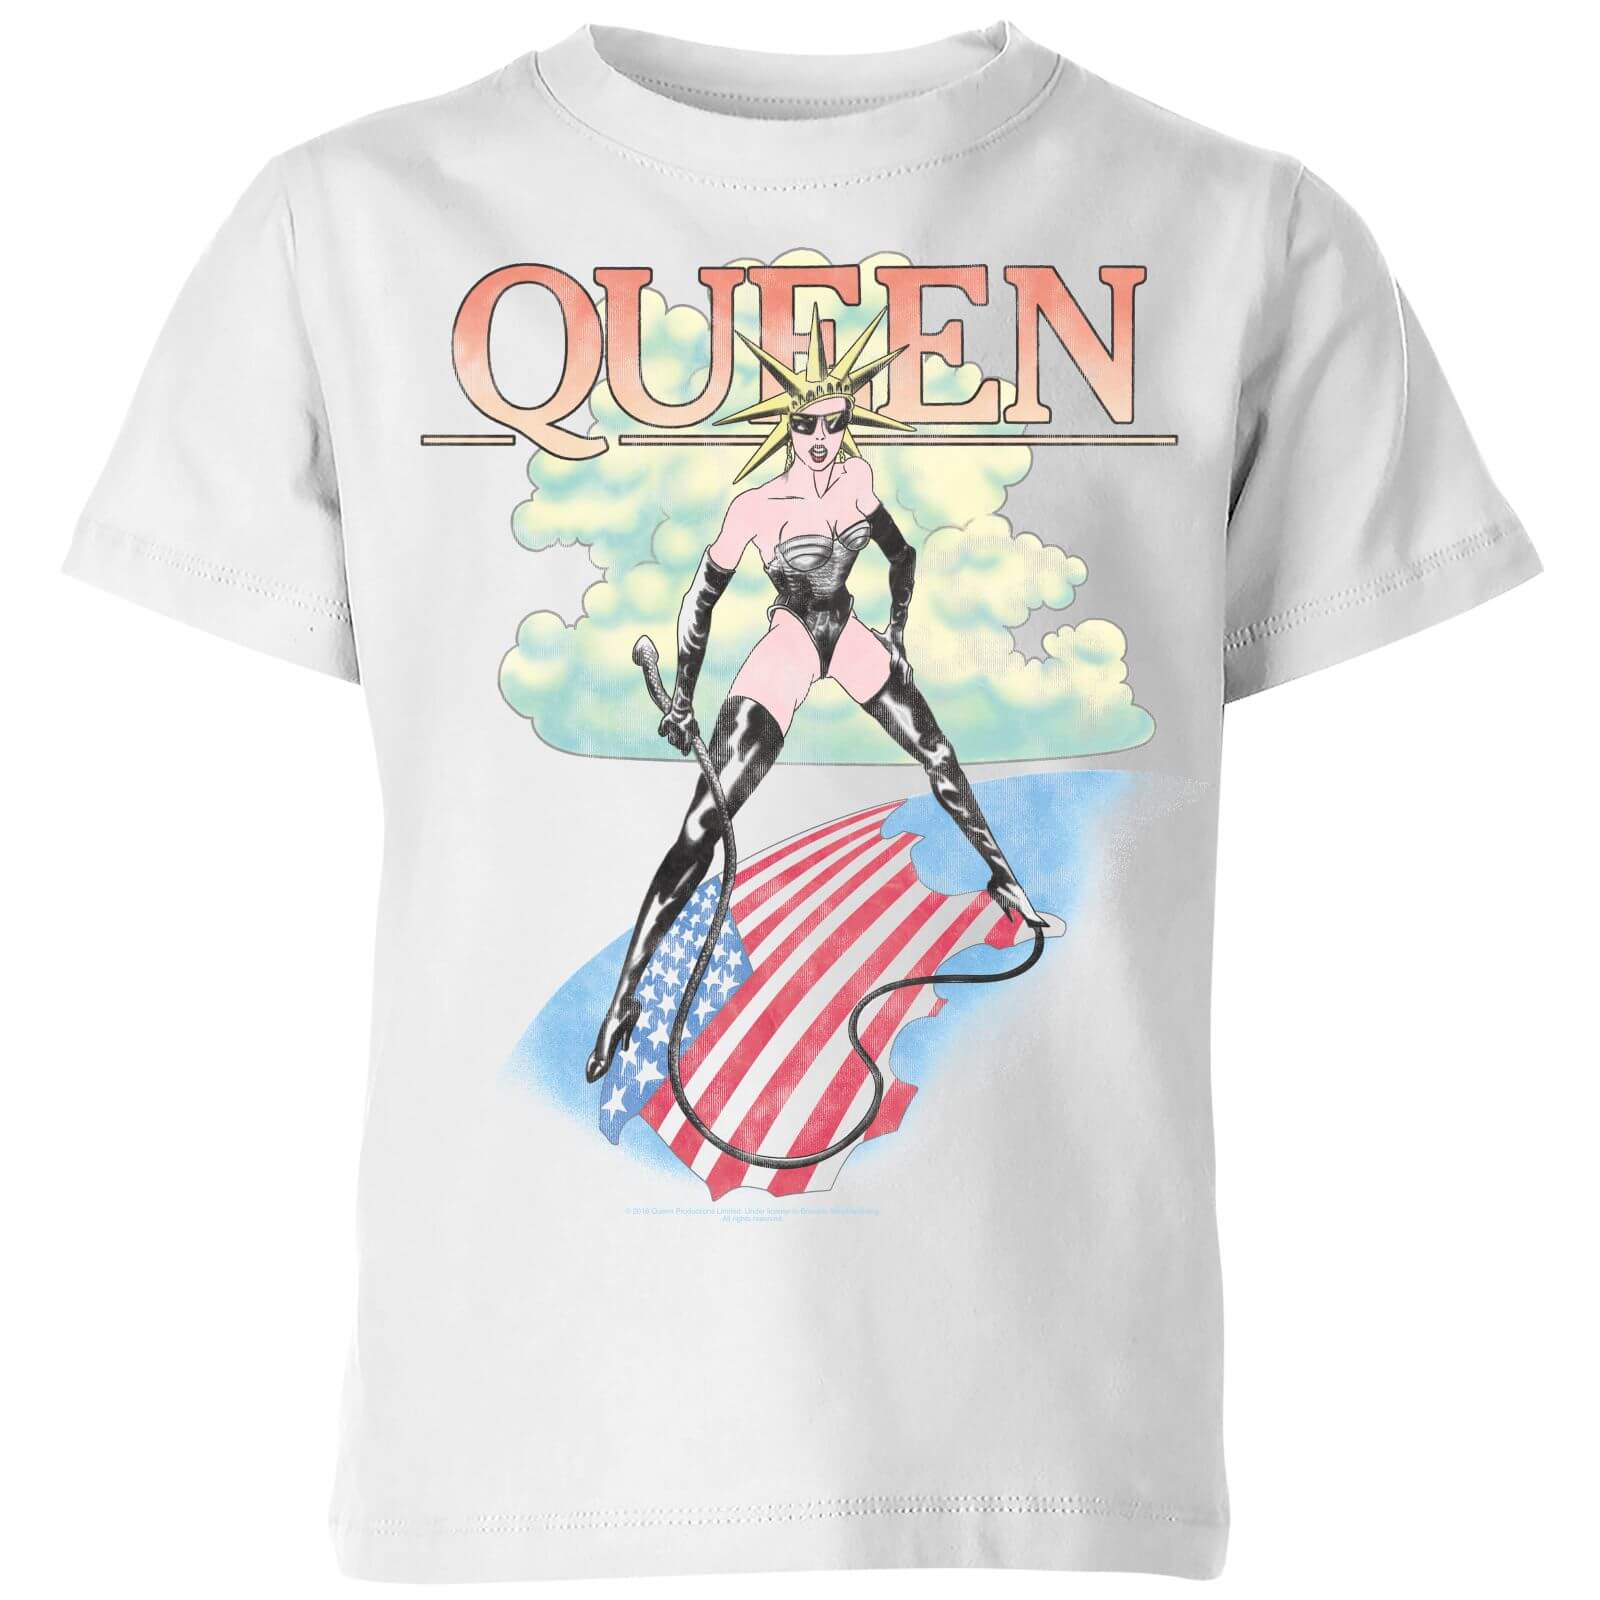 Queen Vintage Tour Kids' T-Shirt - White - 11-12 Years